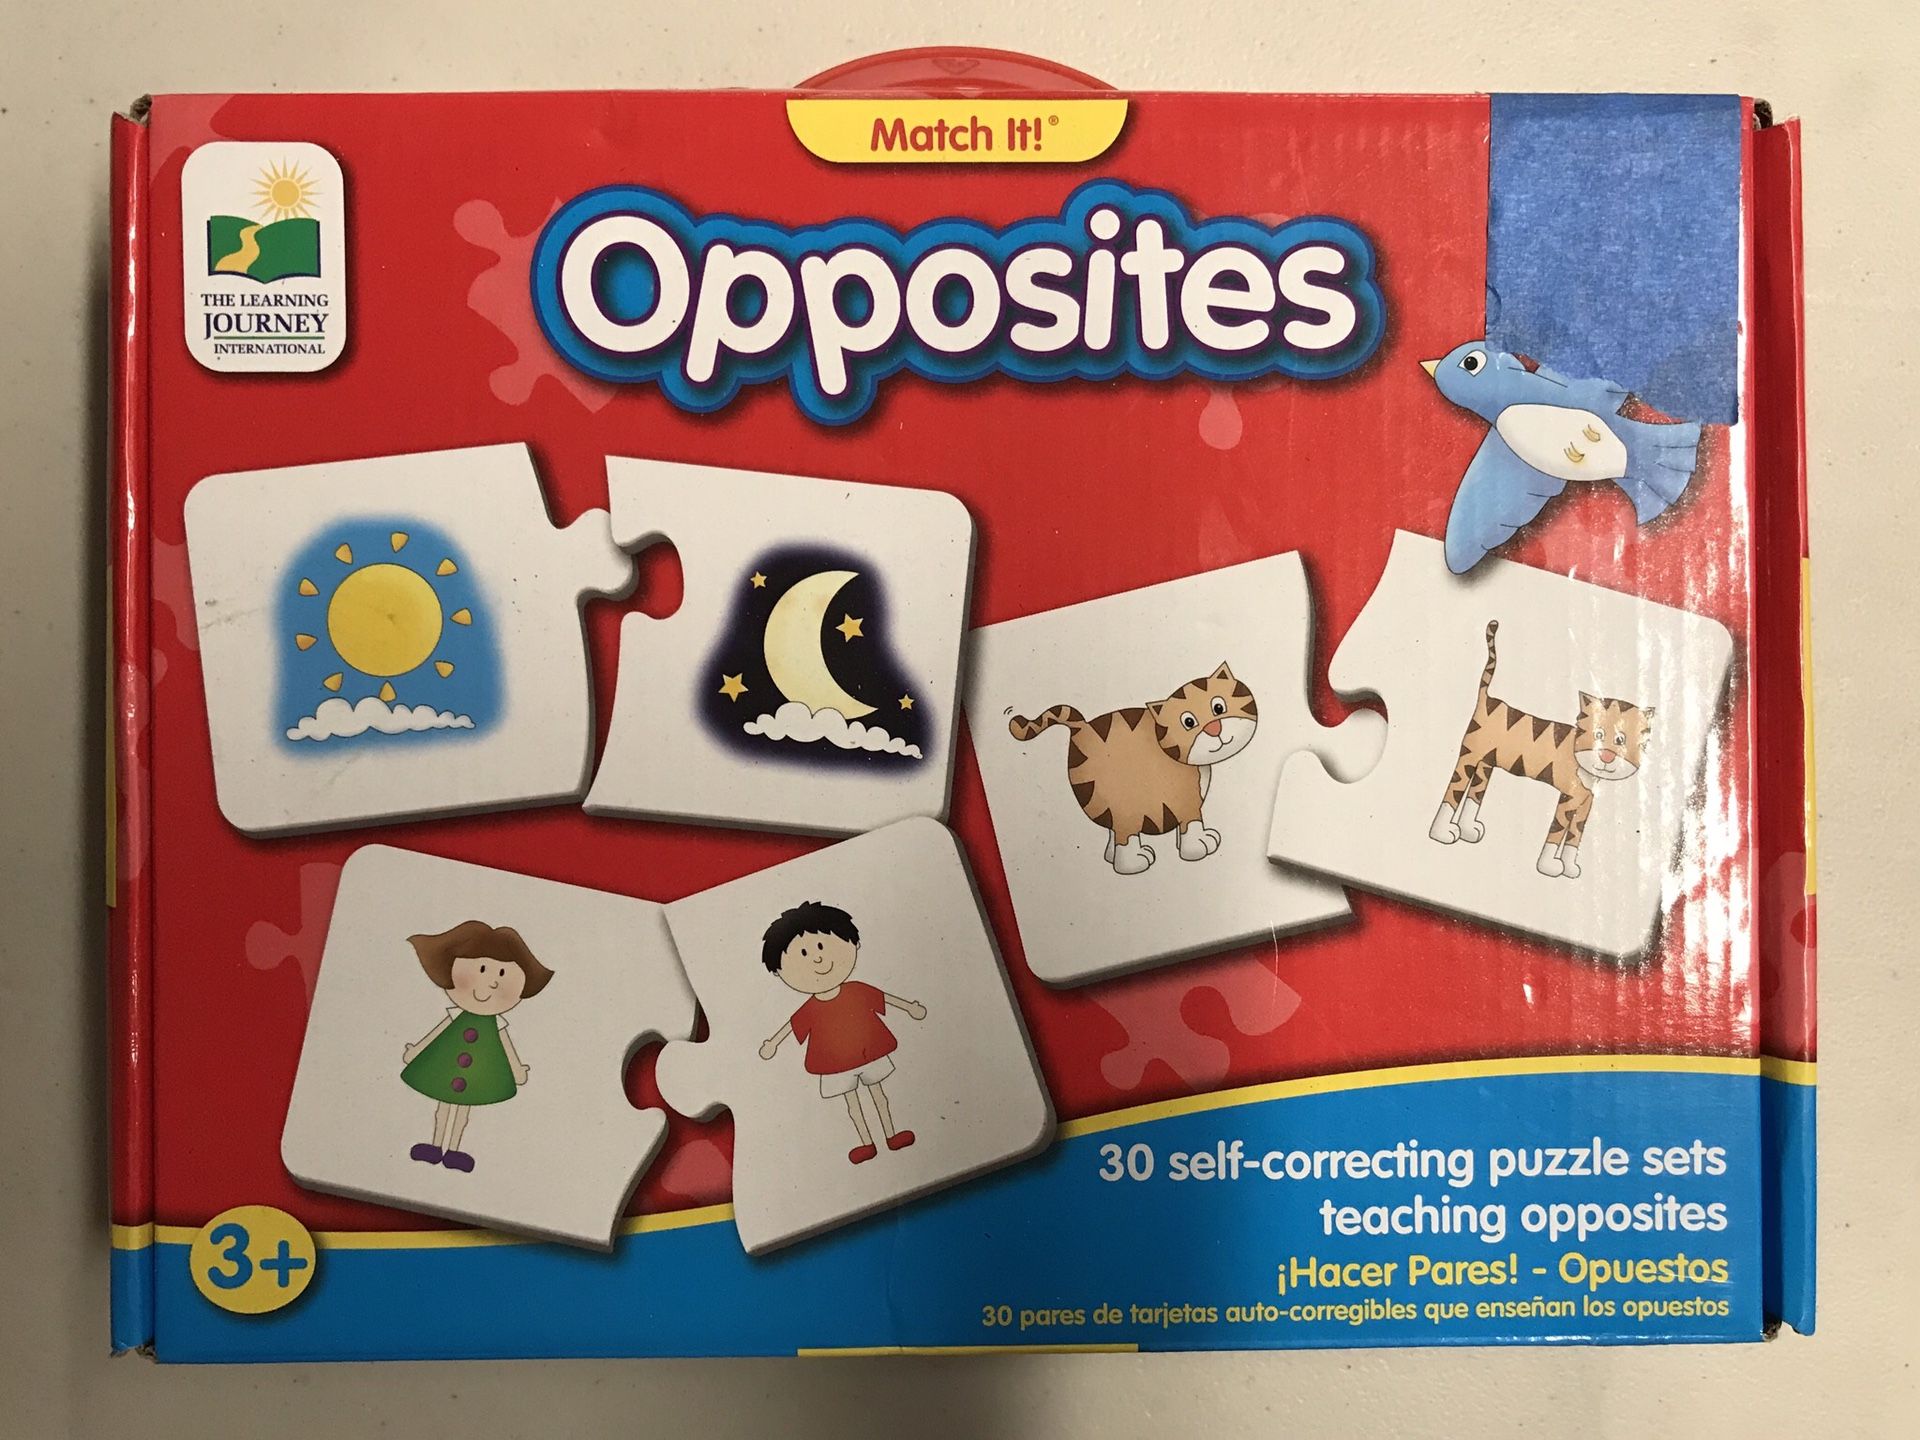 The Learning Journey “Opposites” Educational Puzzle Set